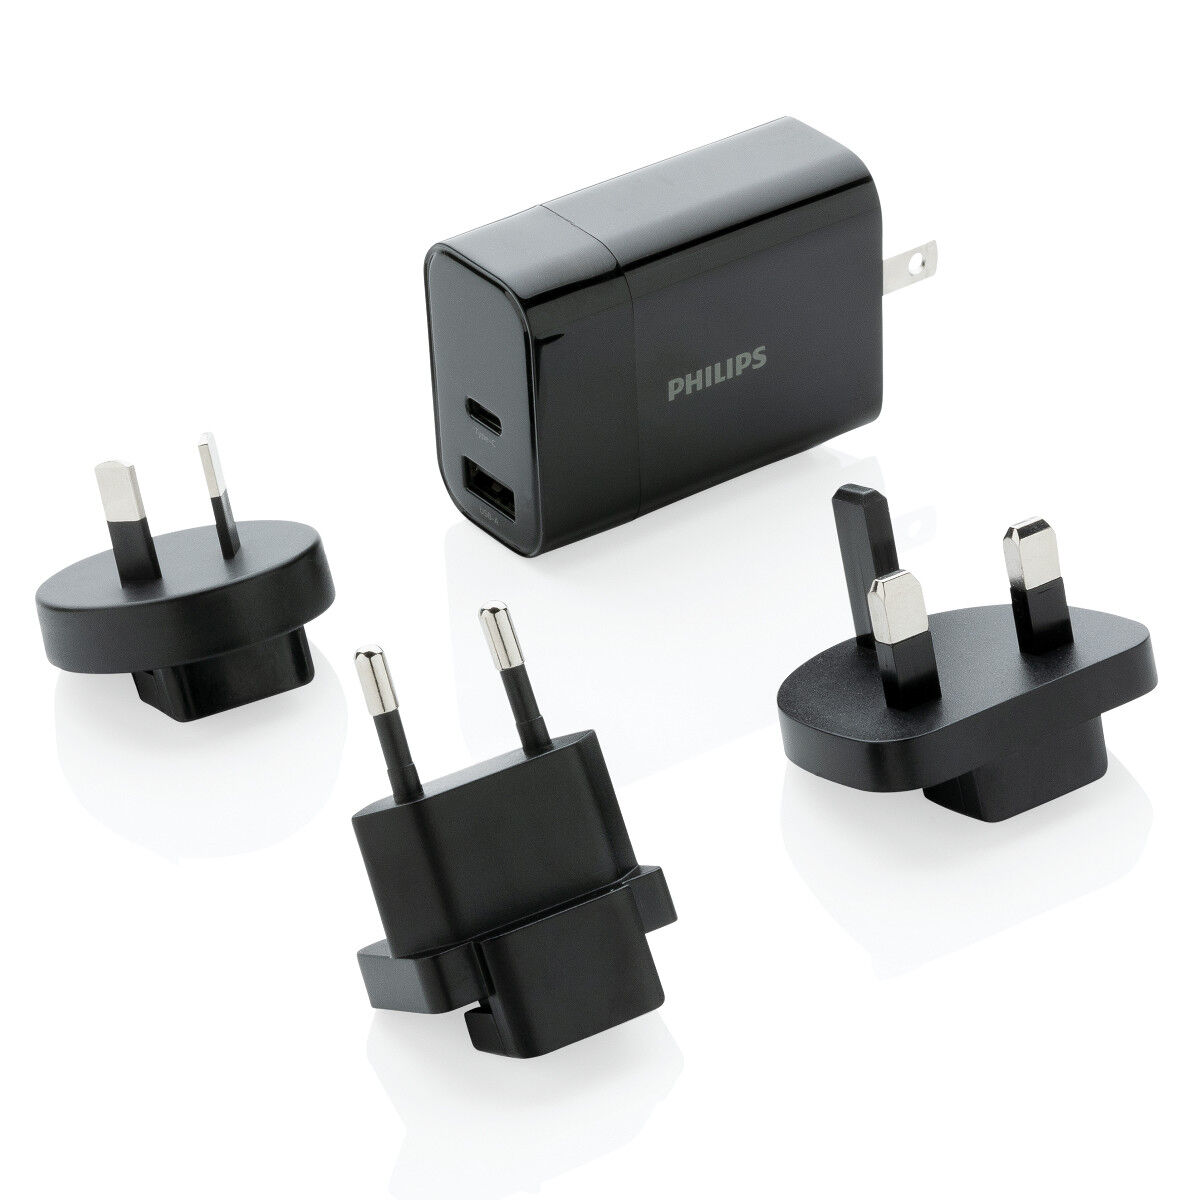 Philips Ultra Fast Travel Charger